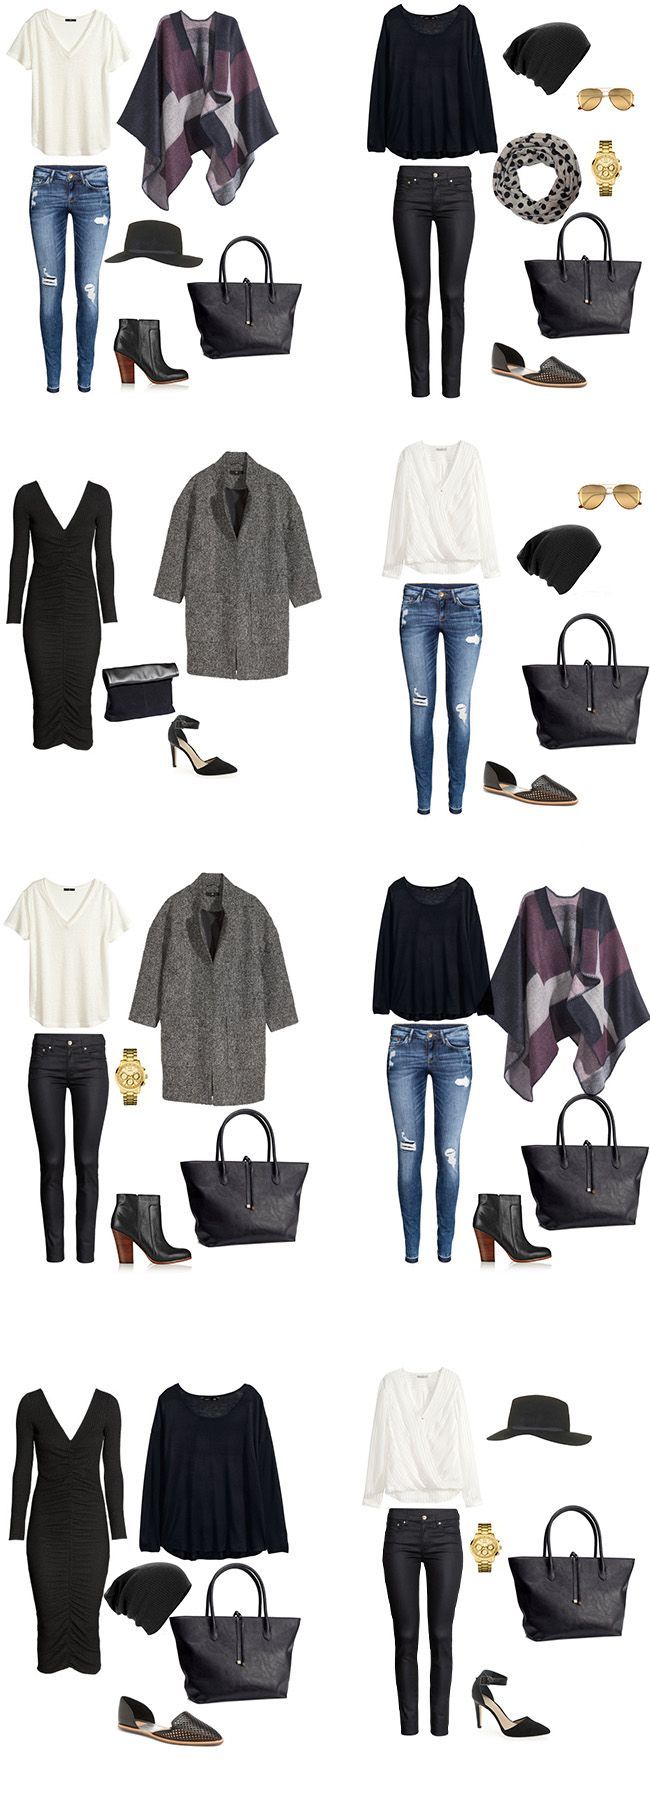 5 Days in New York City Packing List -   24 new york outfits
 ideas